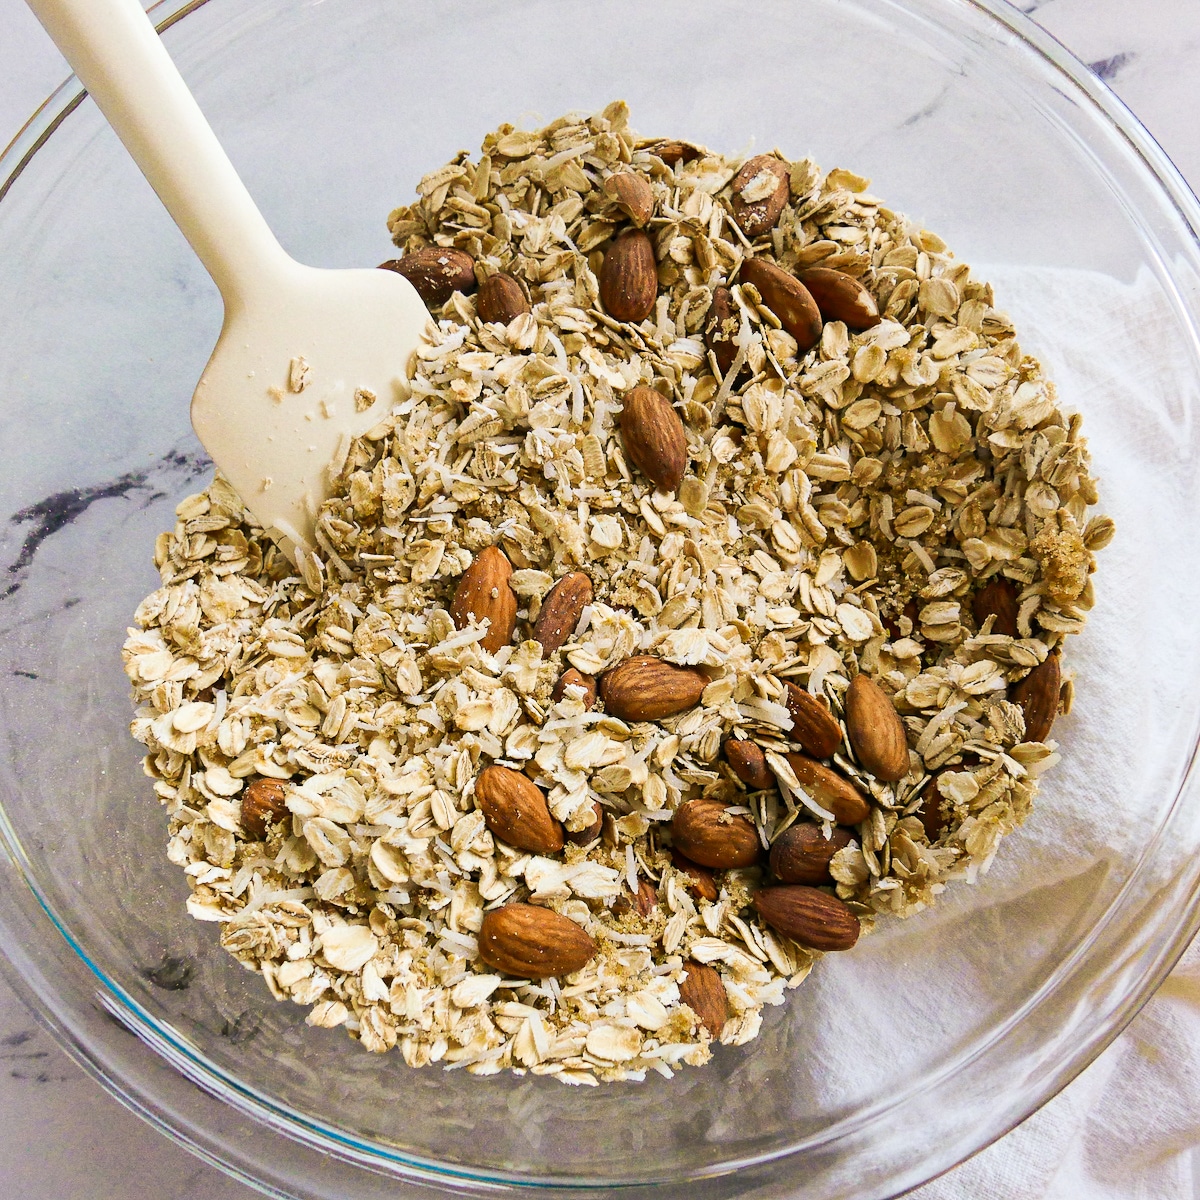 Mixing the oats, almonds, coconut, and brown sugar in a large bowl.